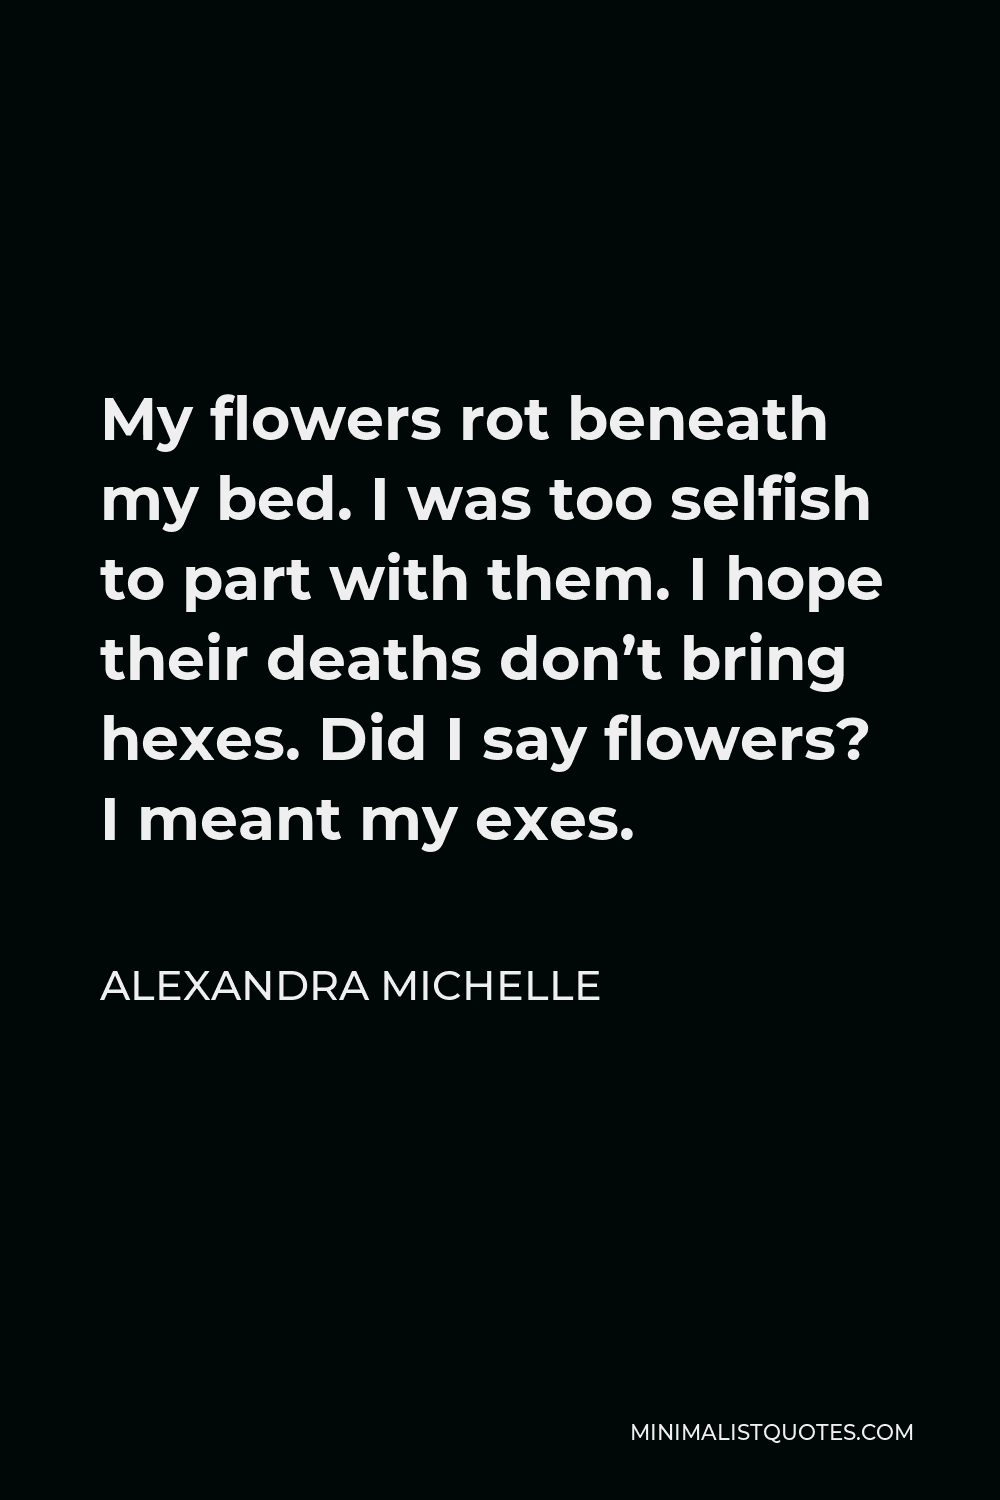 Alexandra Michelle Quote - My flowers rot beneath my bed. I was too selfish to part with them. I hope their deaths don’t bring hexes. Did I say flowers? I meant my exes.